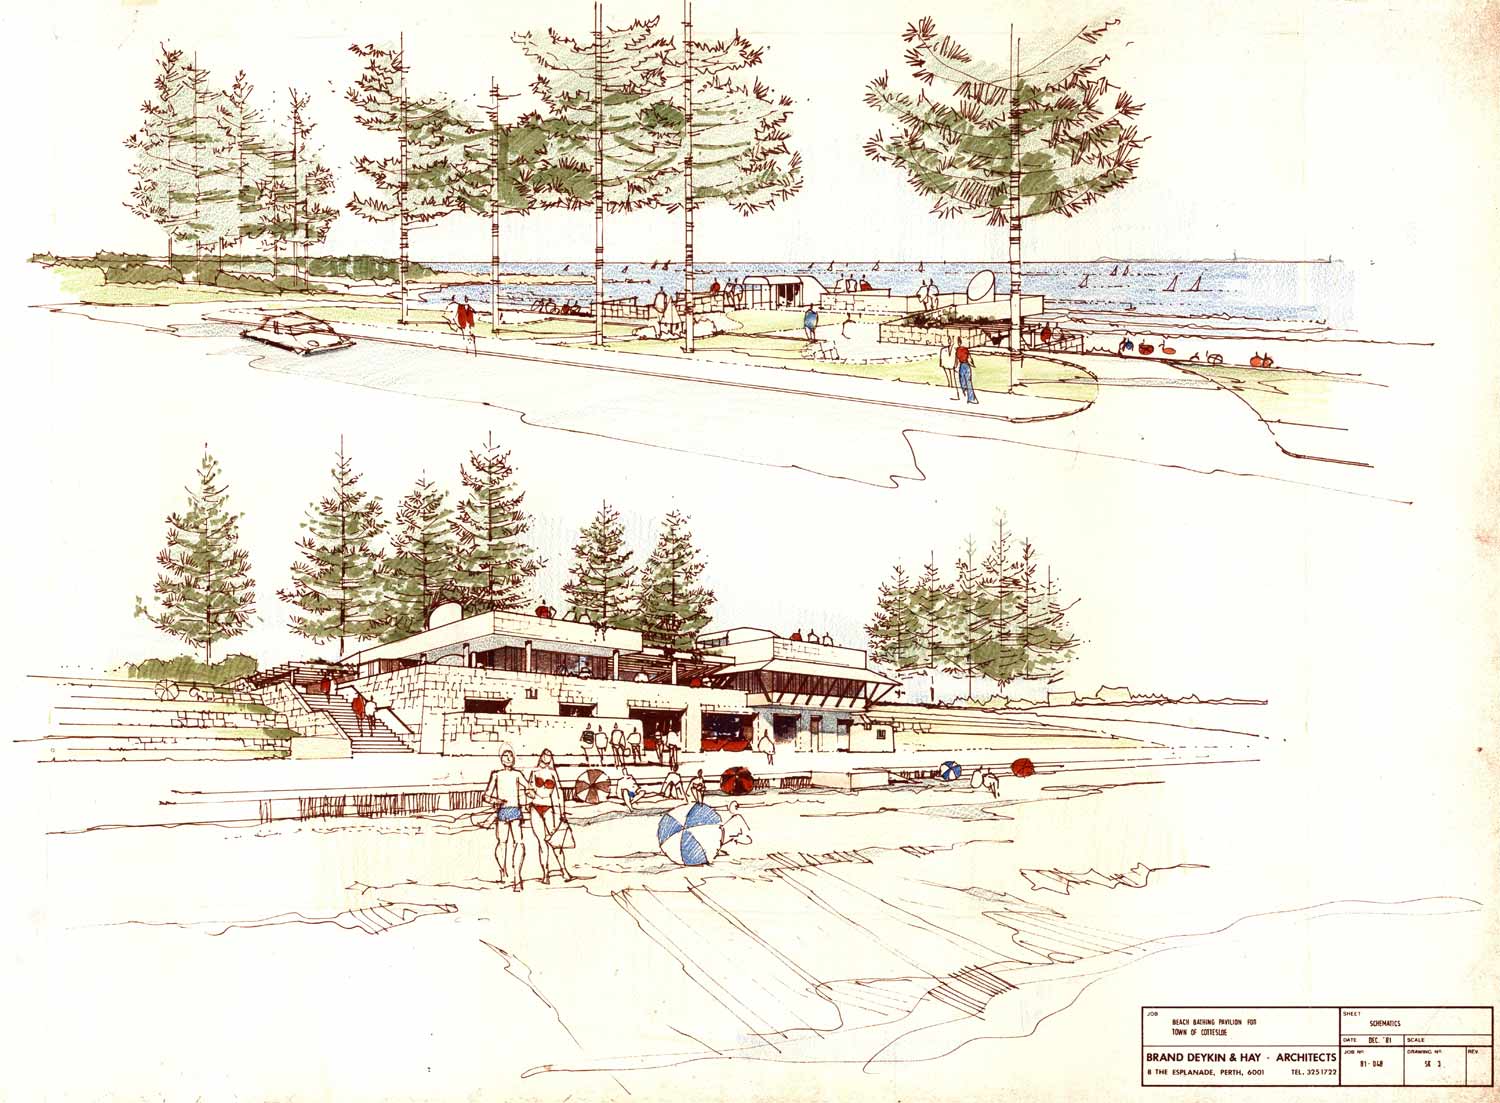 1981 Proposed replacement for the Centenary Pavilion by Brand, Deykin & Hay